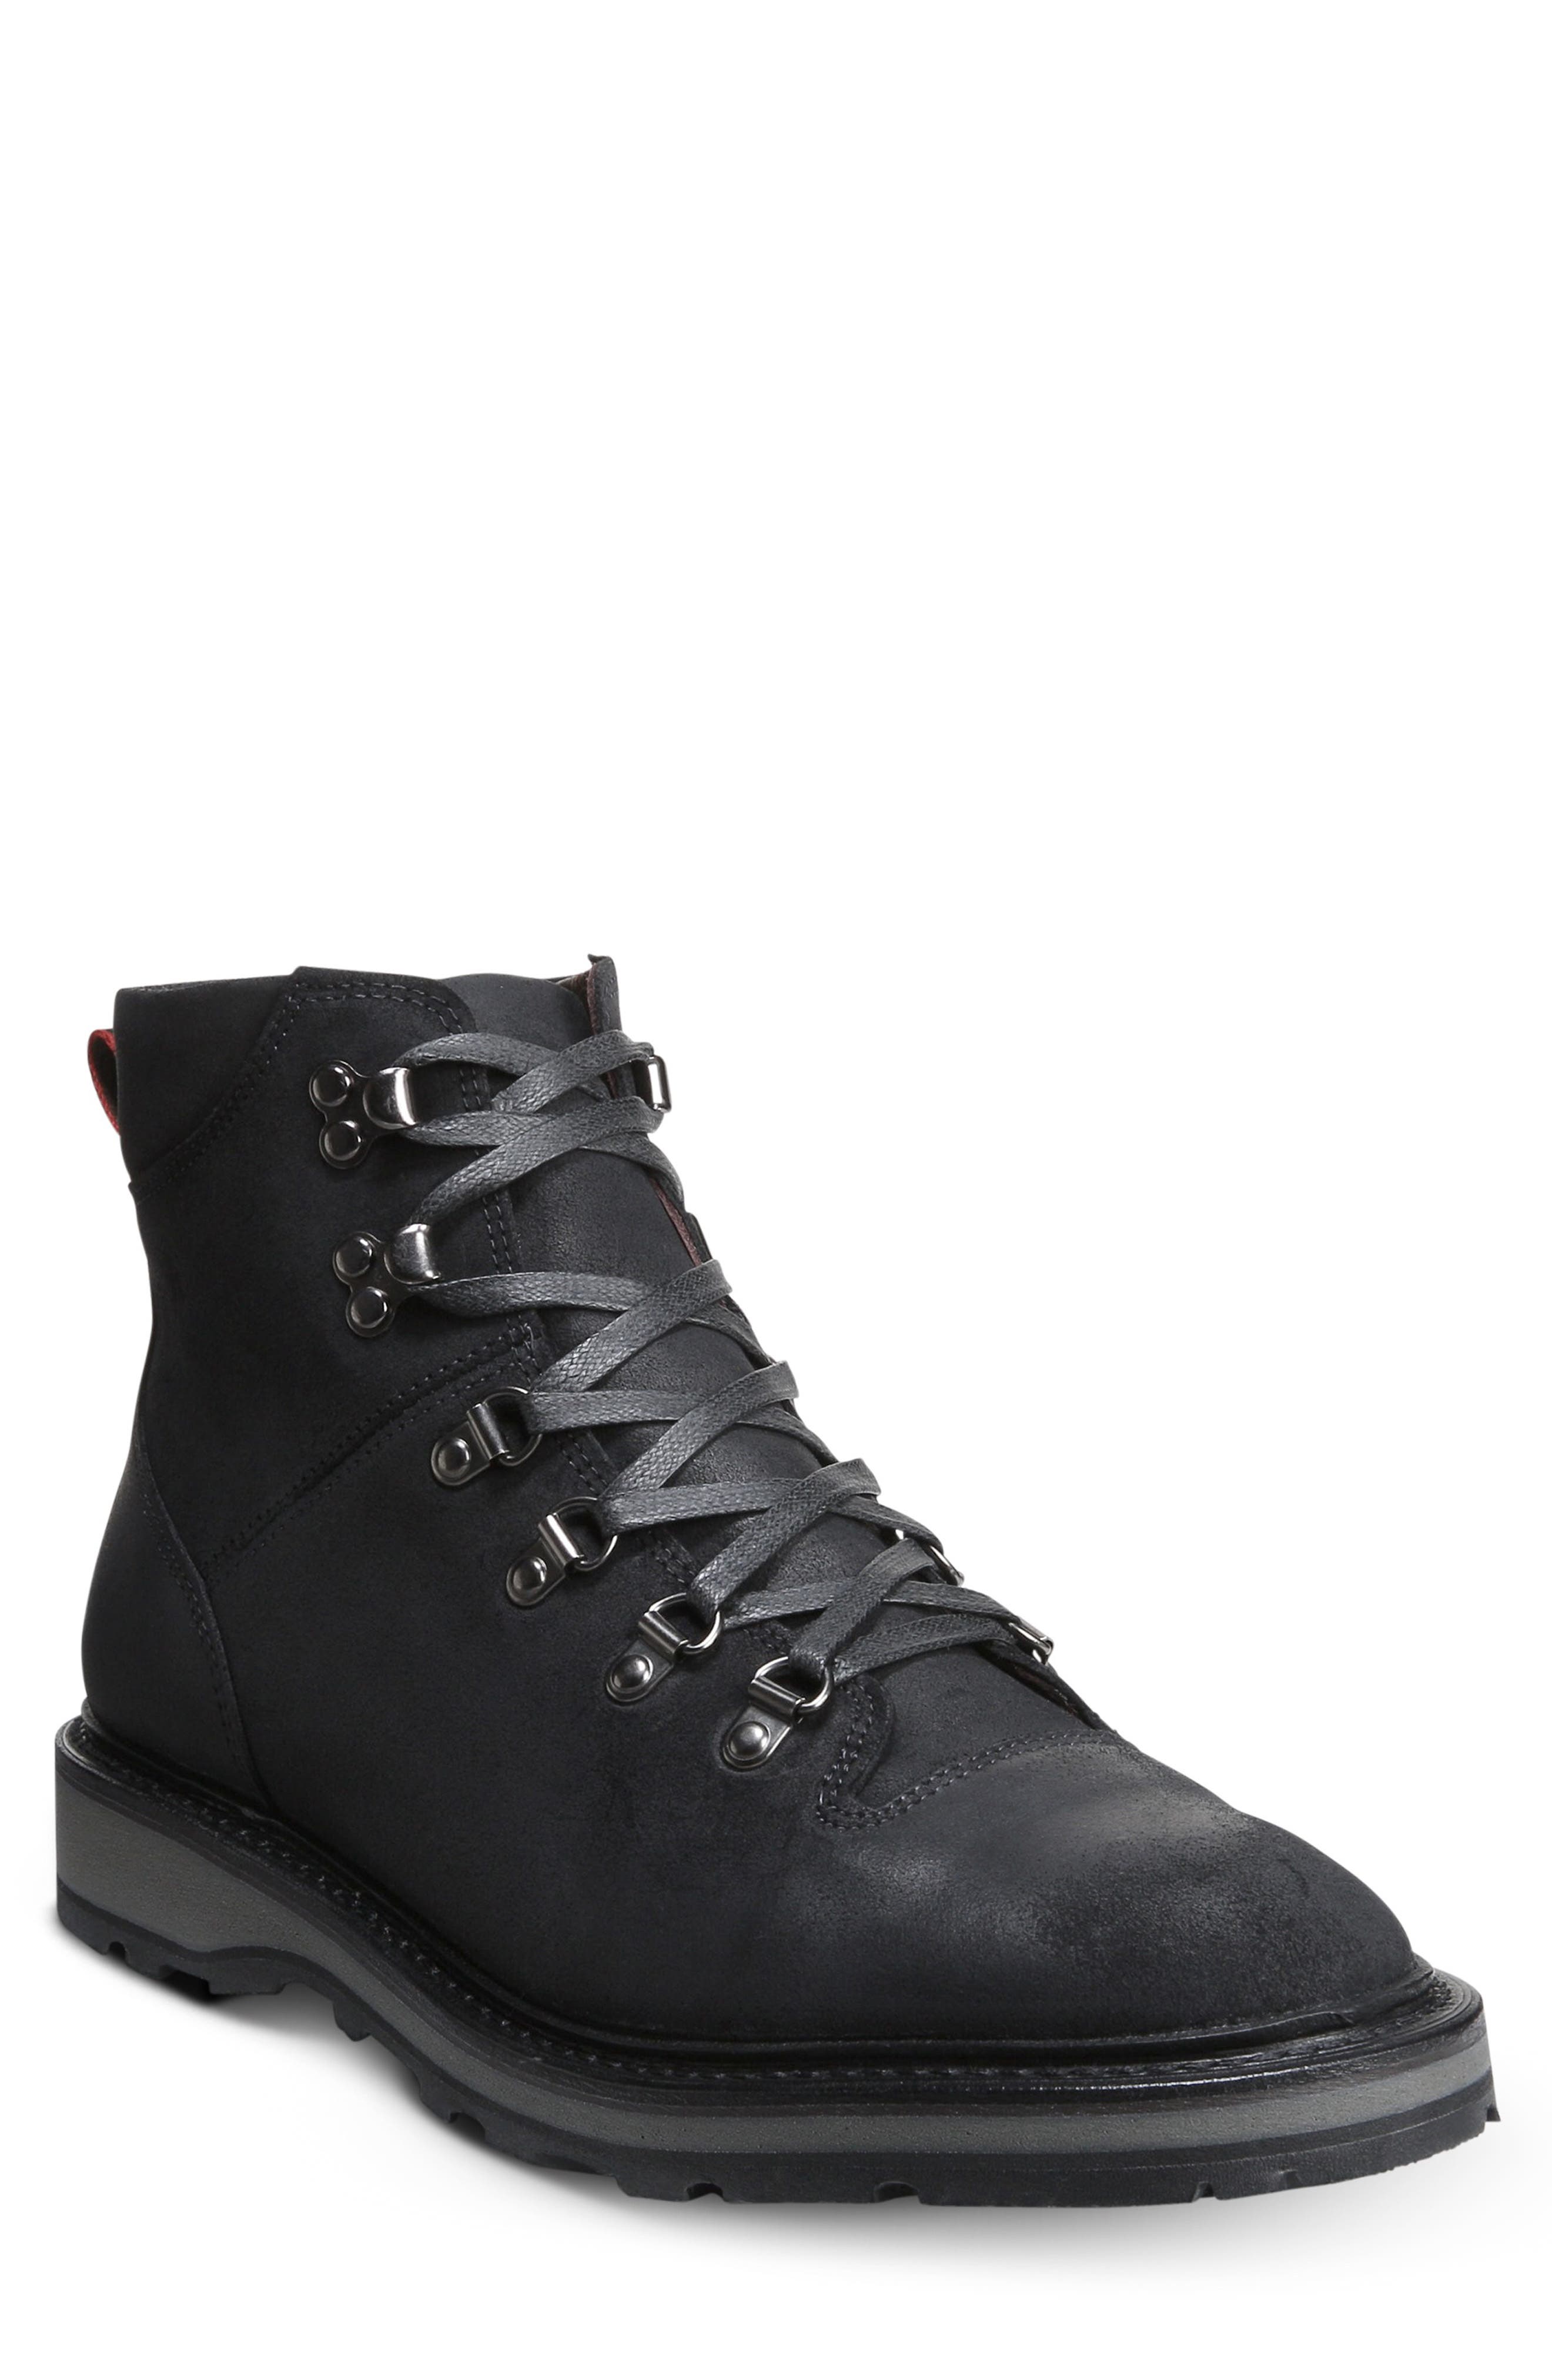 Mens Office Baxter Hiker Boots Black Leather Boots 